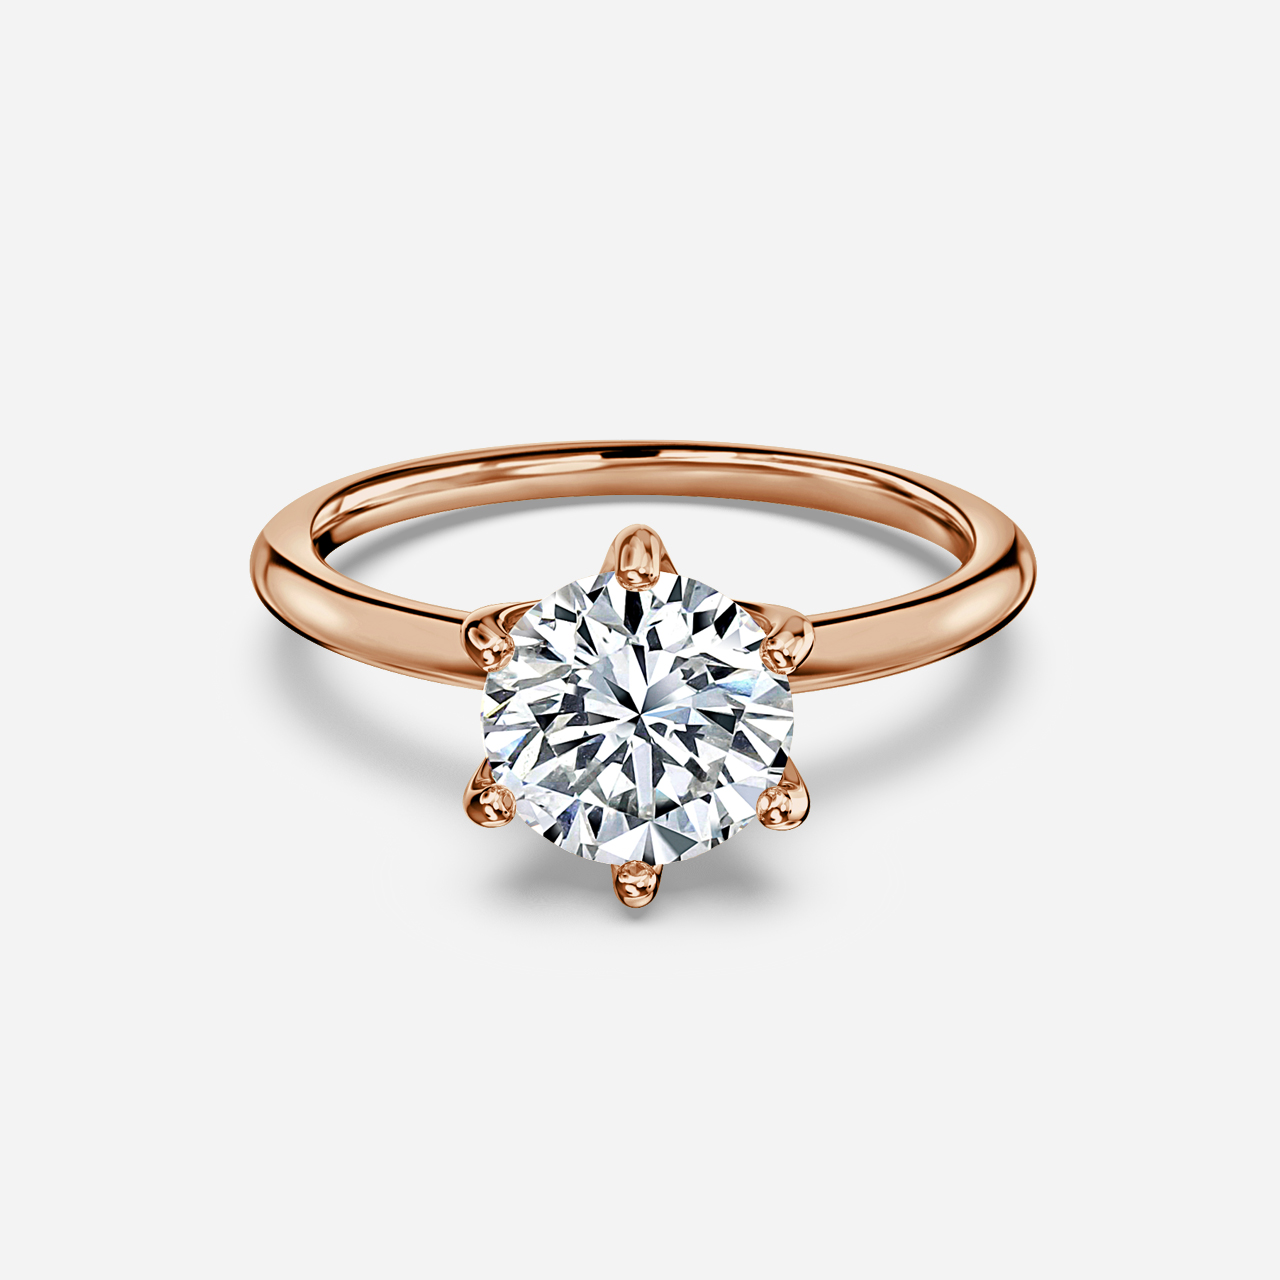 Favian Rose Gold Solitaire Engagement Ring